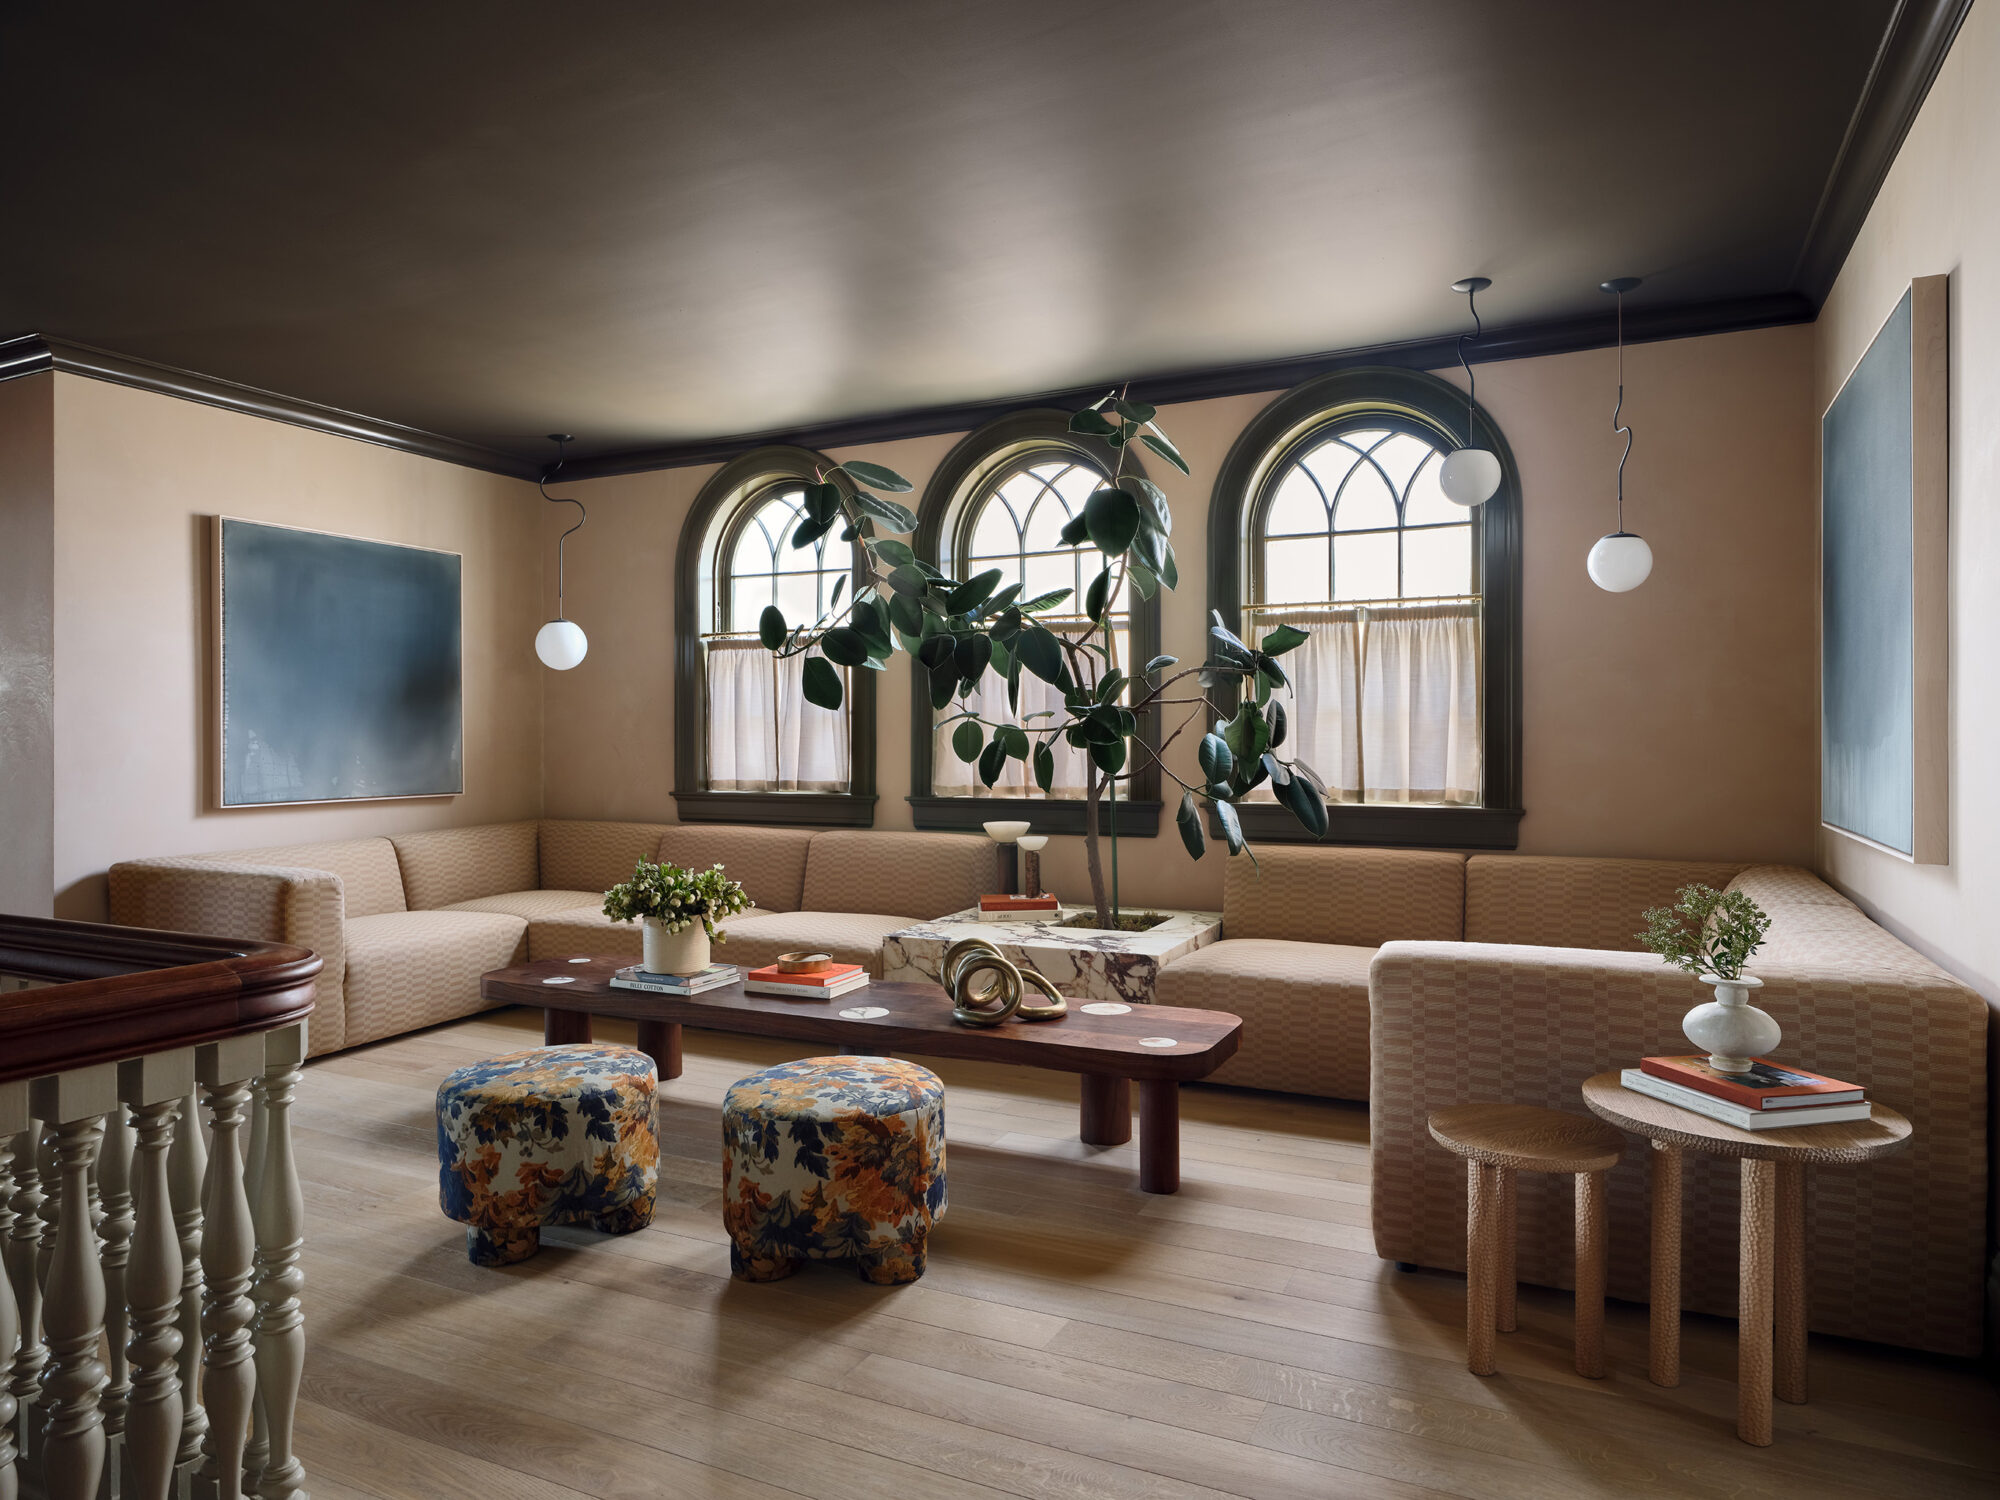 Sofa and coffee table under arched windows